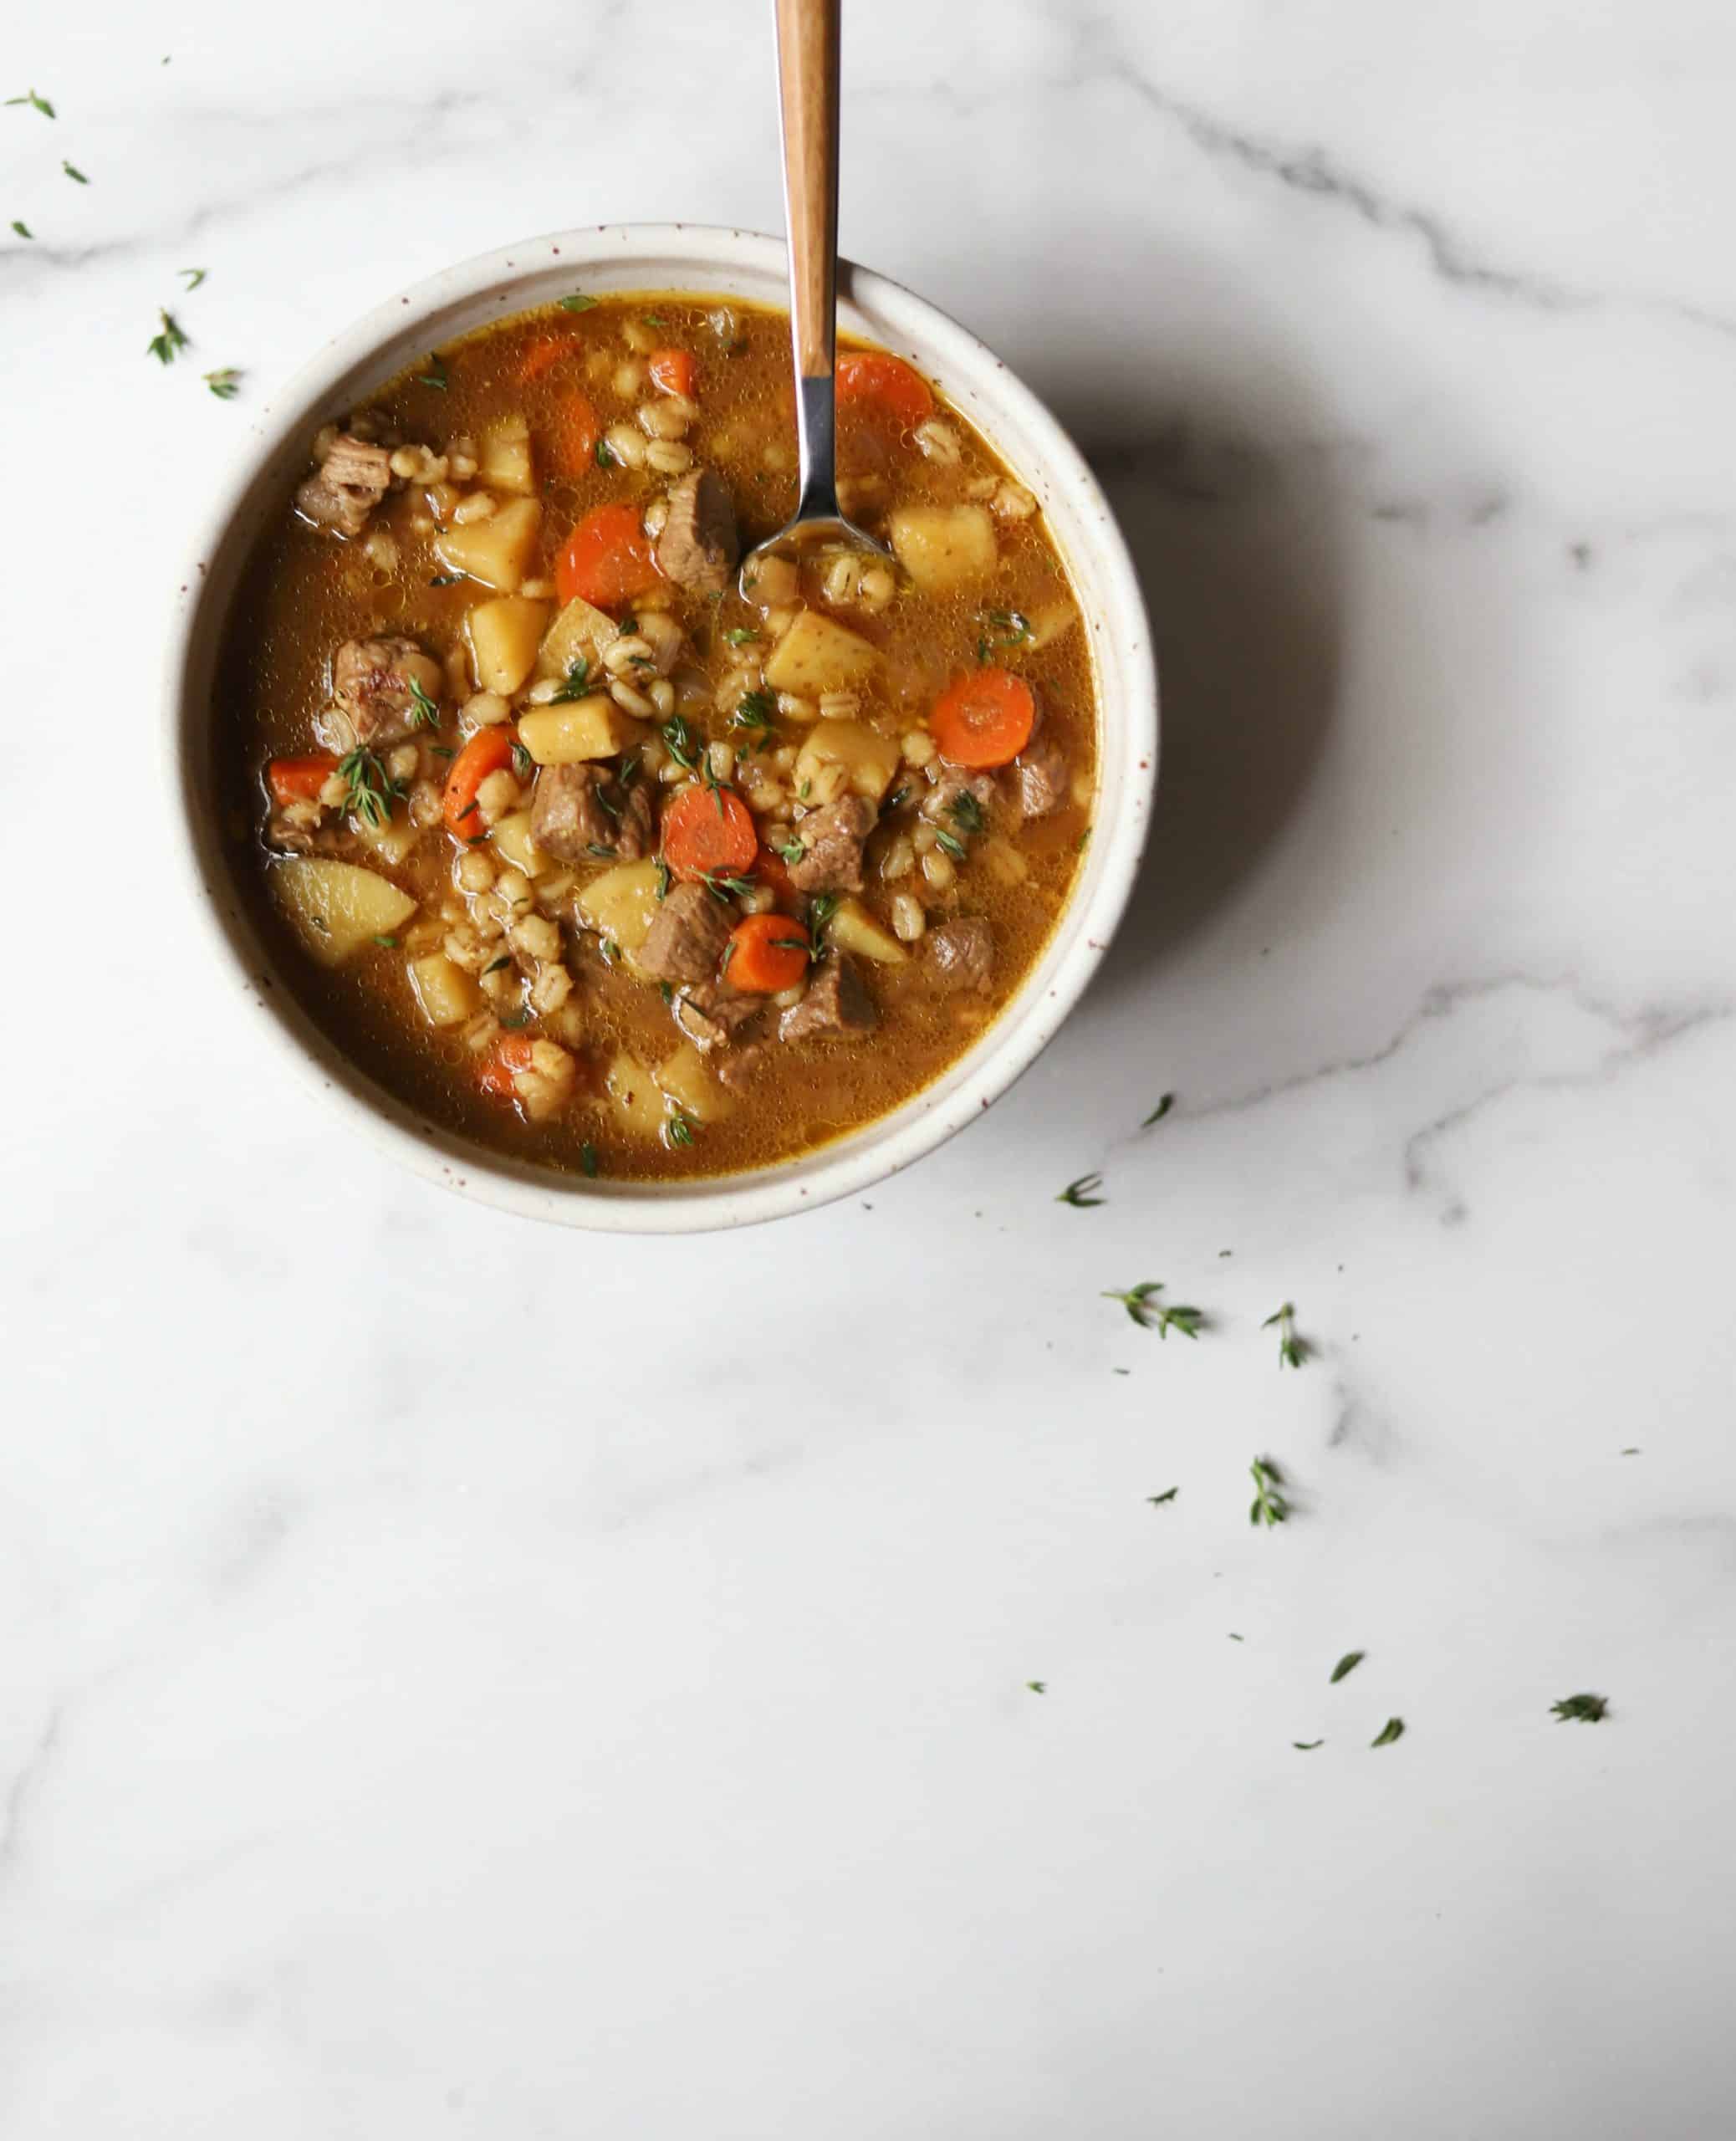 Beef barley soup in a white bowl